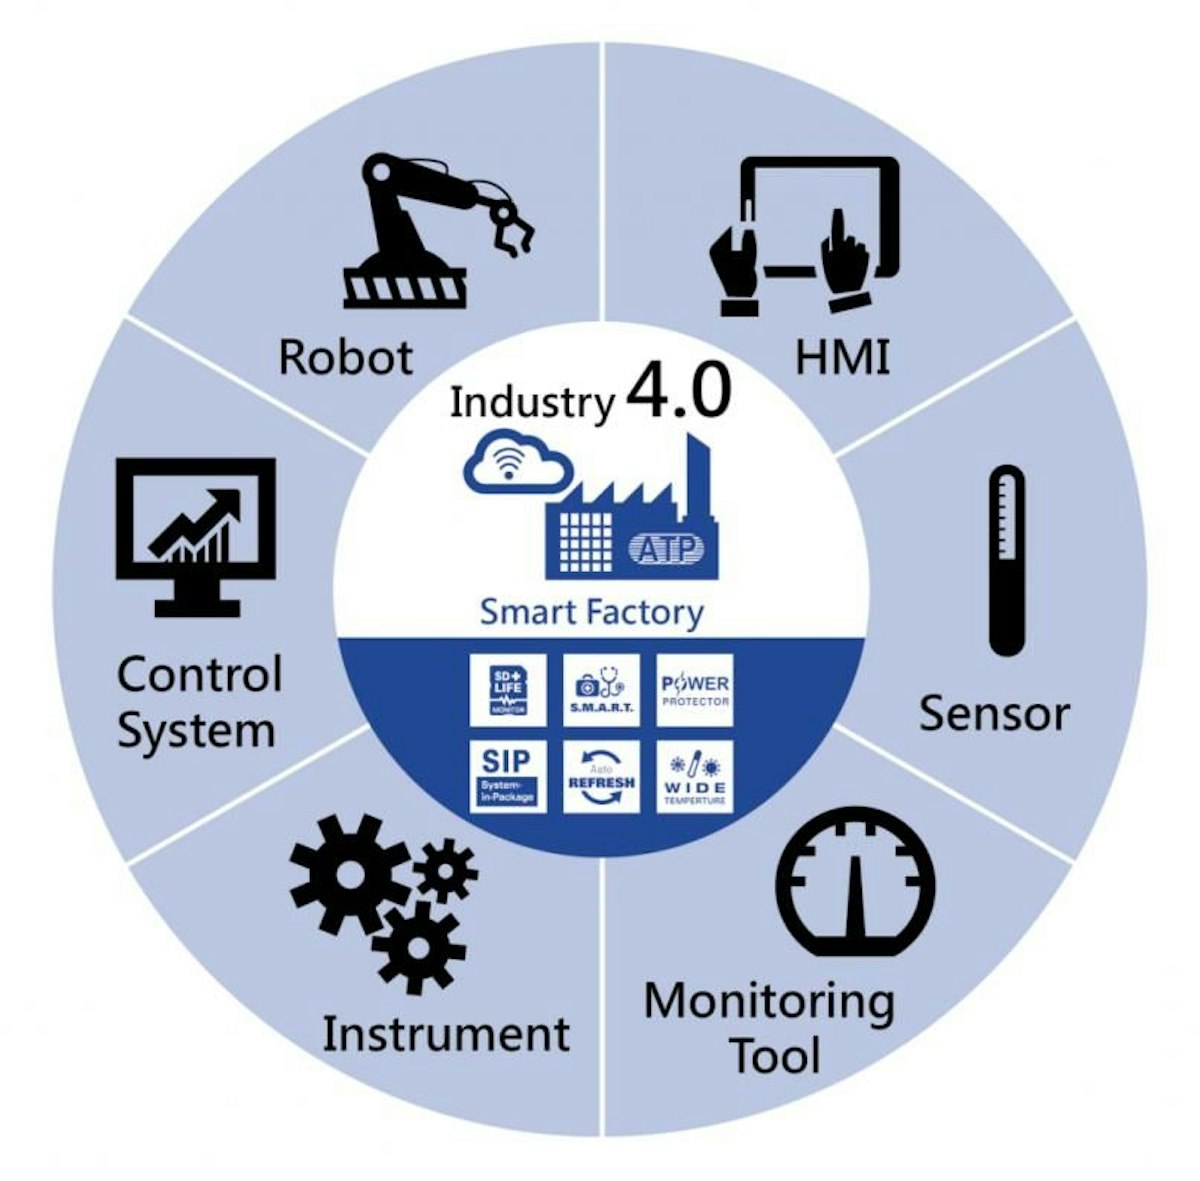 featured image - How Industry 4.0 Impacts IT Companies And What Are Its Benefits